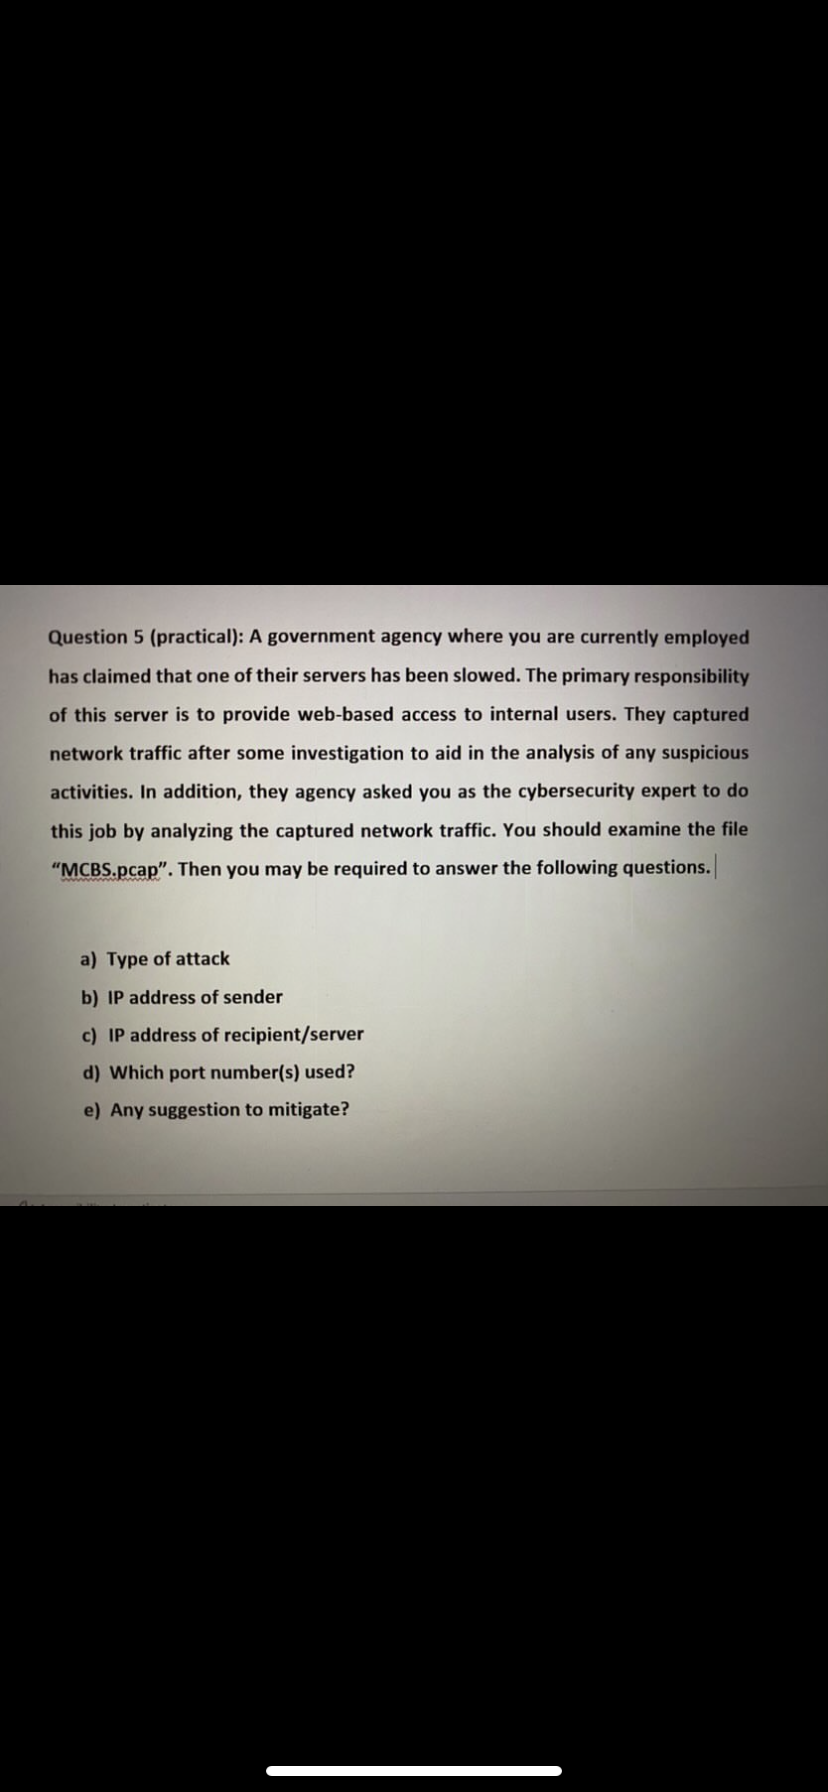 Question 5 (practical): A government agency where you are currently employed
has claimed that one of their servers has been slowed. The primary responsibility
of this server is to provide web-based access to internal users. They captured
network traffic after some investigation to aid in the analysis of any suspicious
activities. In addition, they agency asked you as the cybersecurity expert to do
this job by analyzing the captured network traffic. You should examine the file
"MCBS.pcap". Then you may be required to answer the following questions.
a) Type of attack
b) IP address of sender
c) IP address of recipient/server
d) Which port number(s) used?
e) Any suggestion to mitigate?